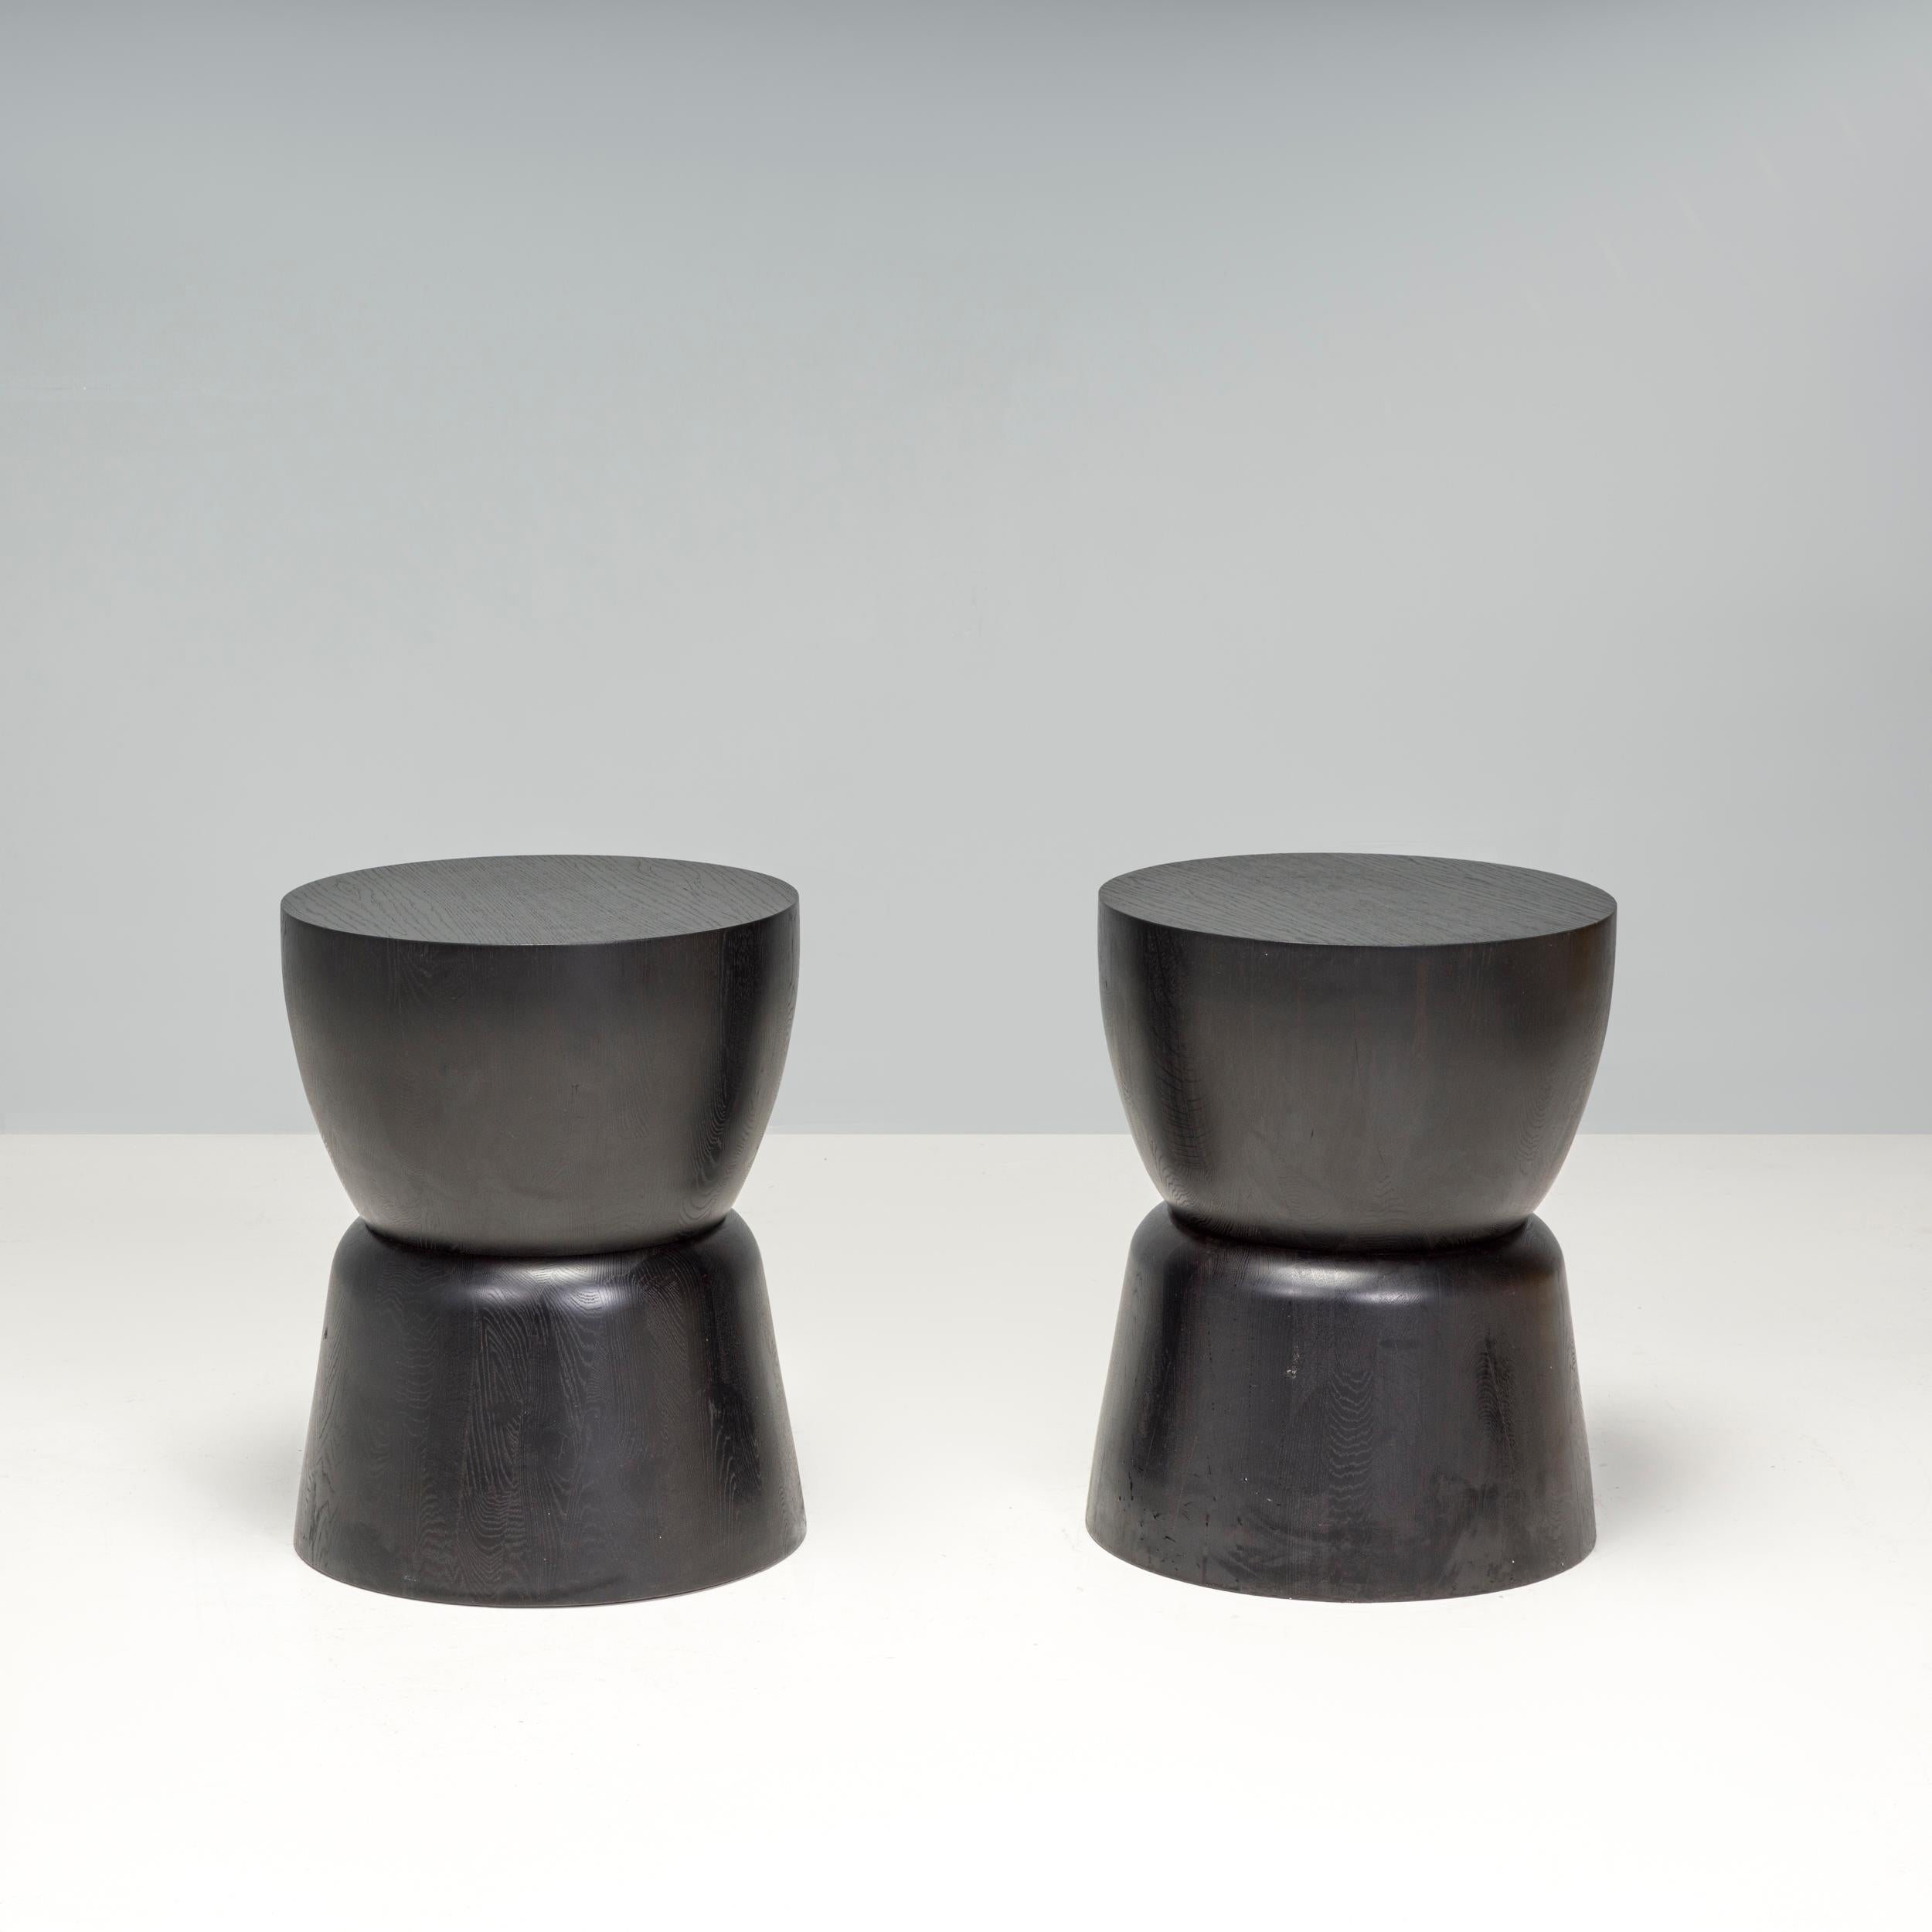 Simple yet chic, this pair of drum shaped side tables are sculptural pedestal statement pieces. 
 
Carved from a solid block of wood and stained black, the side tables have a flat circular top and a curved drum shaped body. Can be used as a pair of